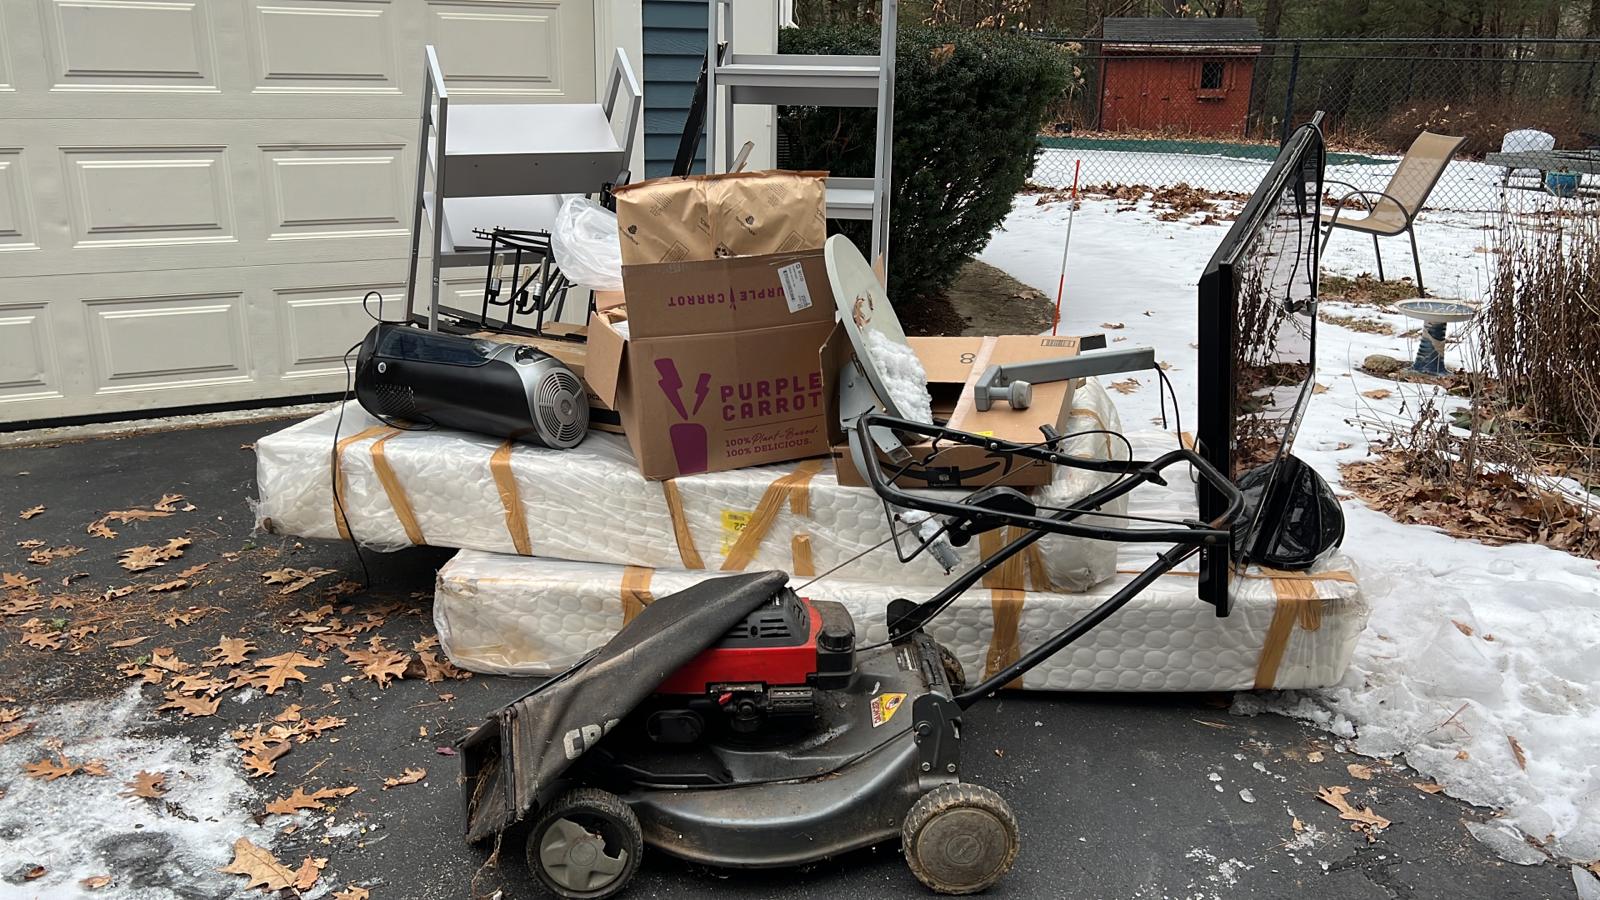 An old lawnmower, two mattresses, a stereo, a television, and some other junk sitting in a driveway outside of a garage